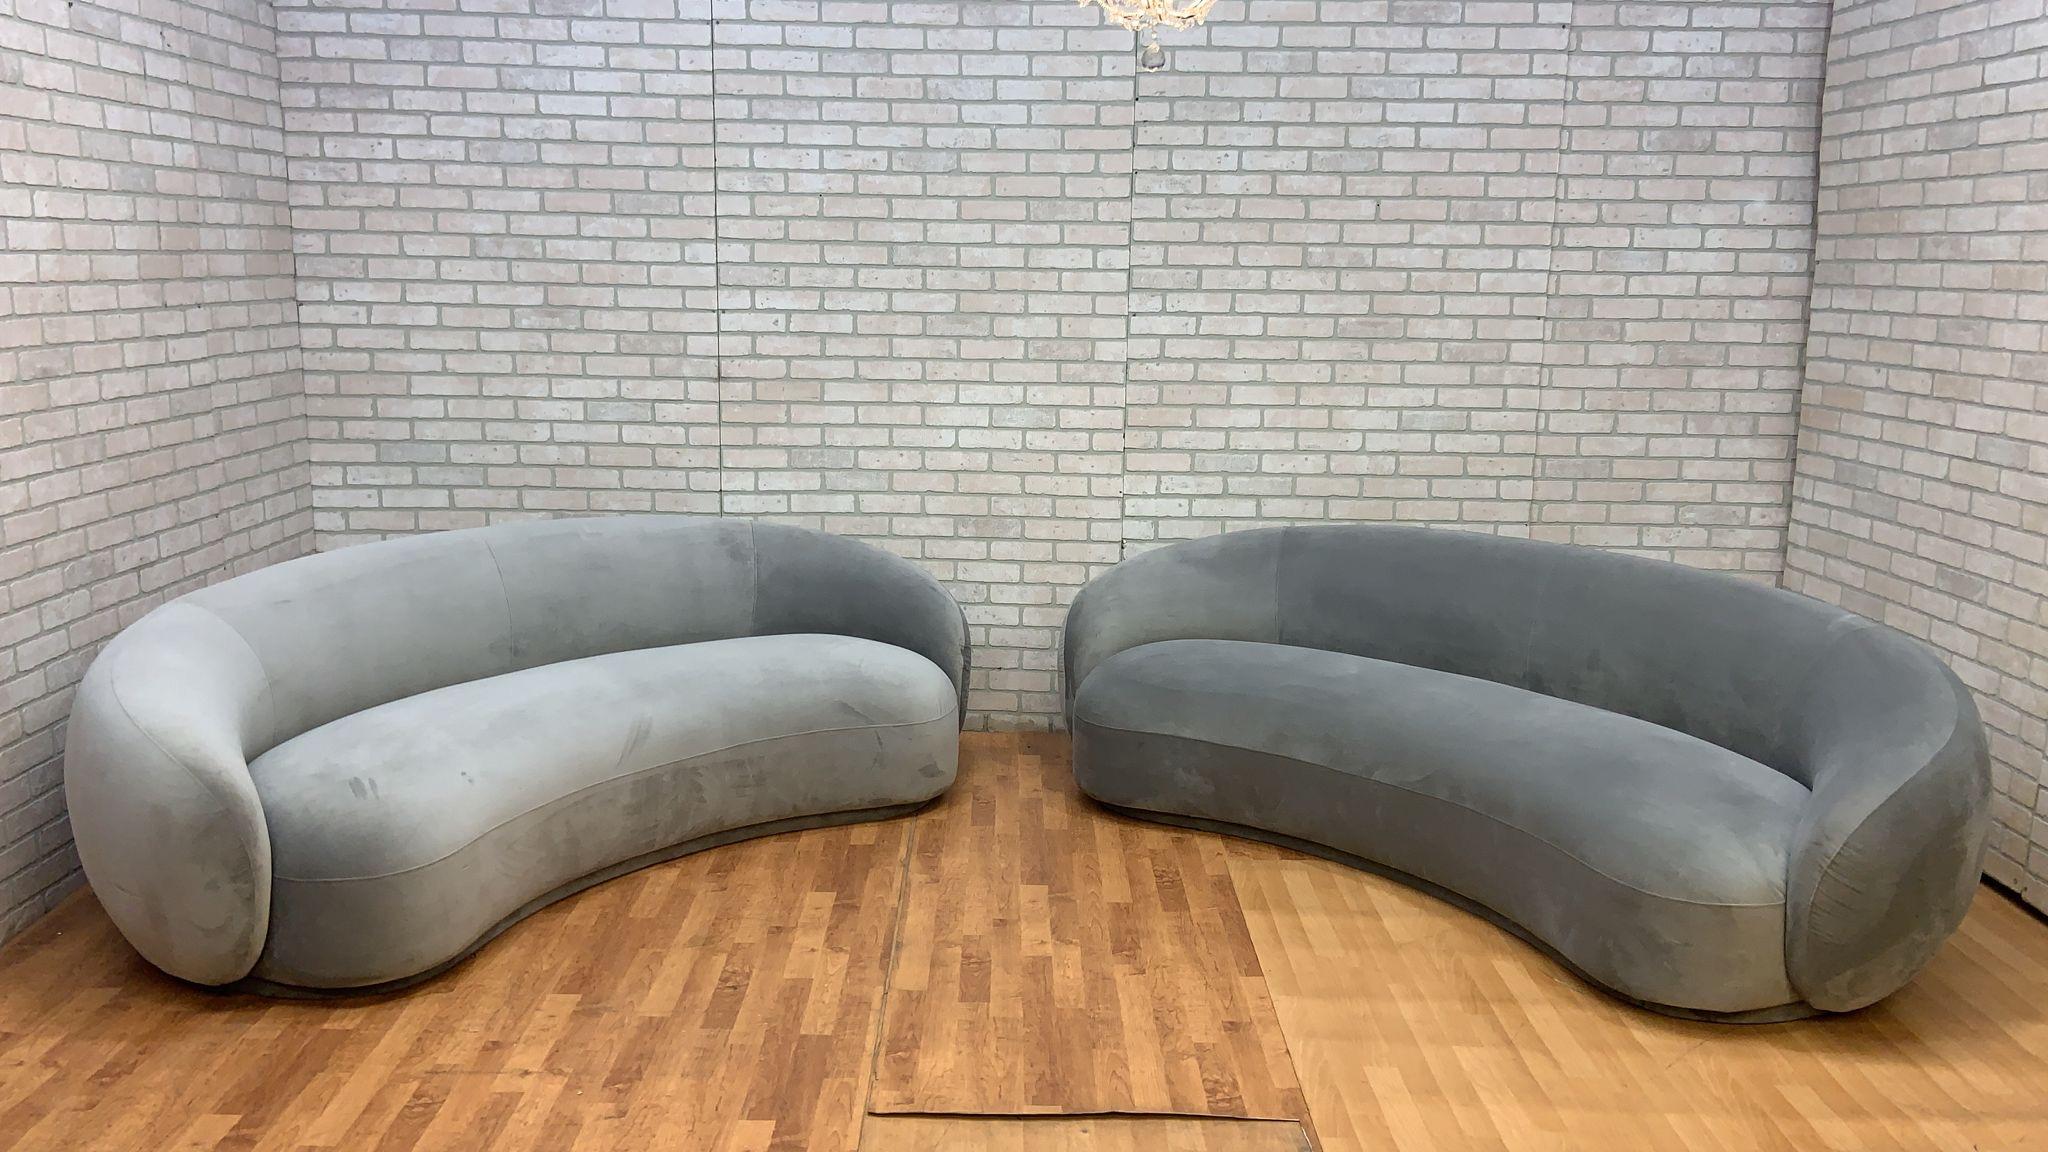 Vintage Style Julep Curved Sofas in Grey Performance Velvet - Set of 2

Gorgeous Designed Vintage Style Set of Oversized Curved Arm Serpentine Front Asymmetrical Julep Sofas. These Chic and Stylish Sofas are Being Offered in their original condition